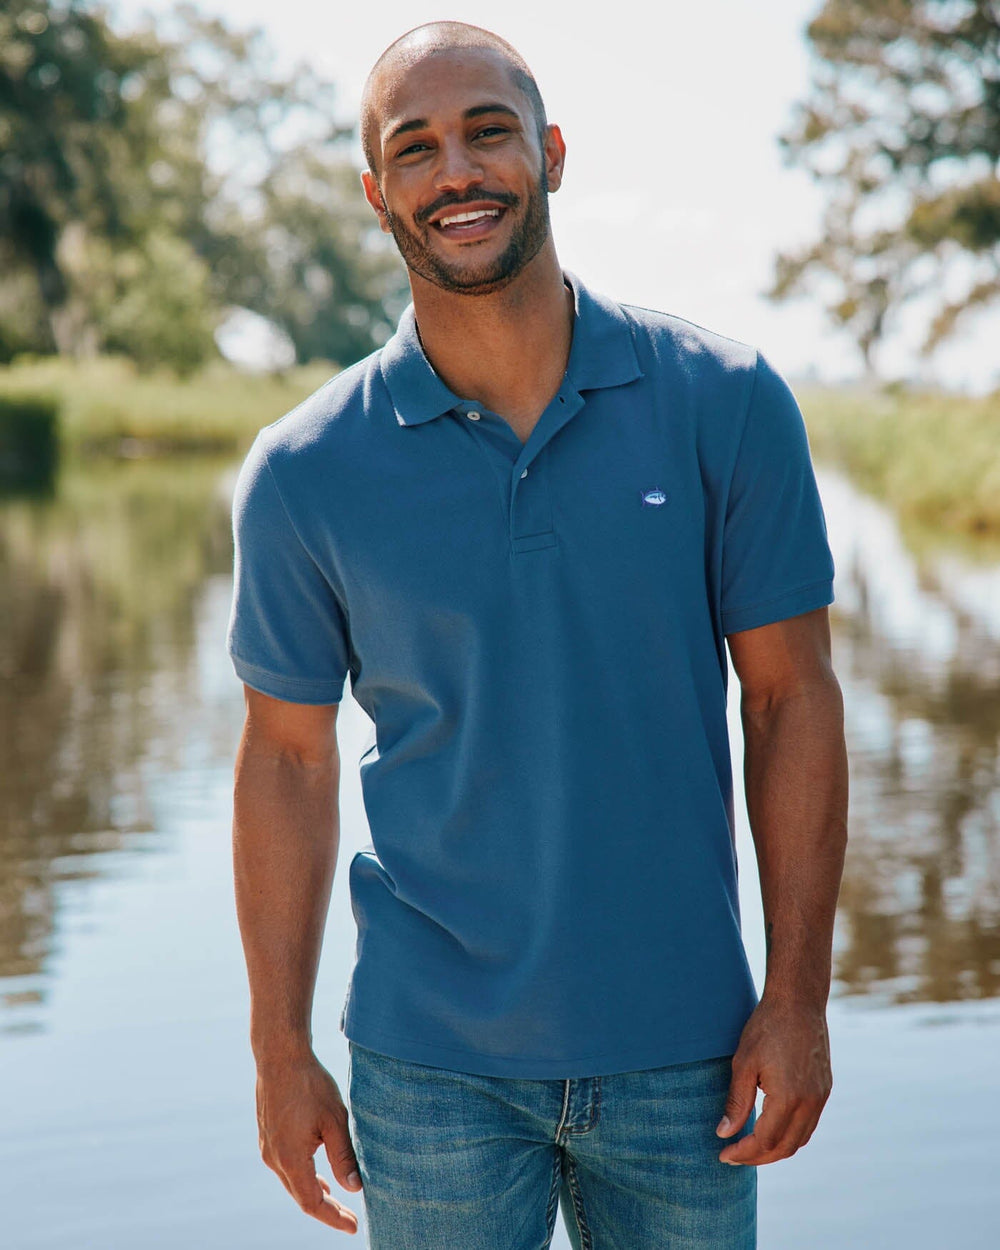 The front view of the Southern Tide New Skipjack Polo Shirt by Southern Tide - Blue Haze